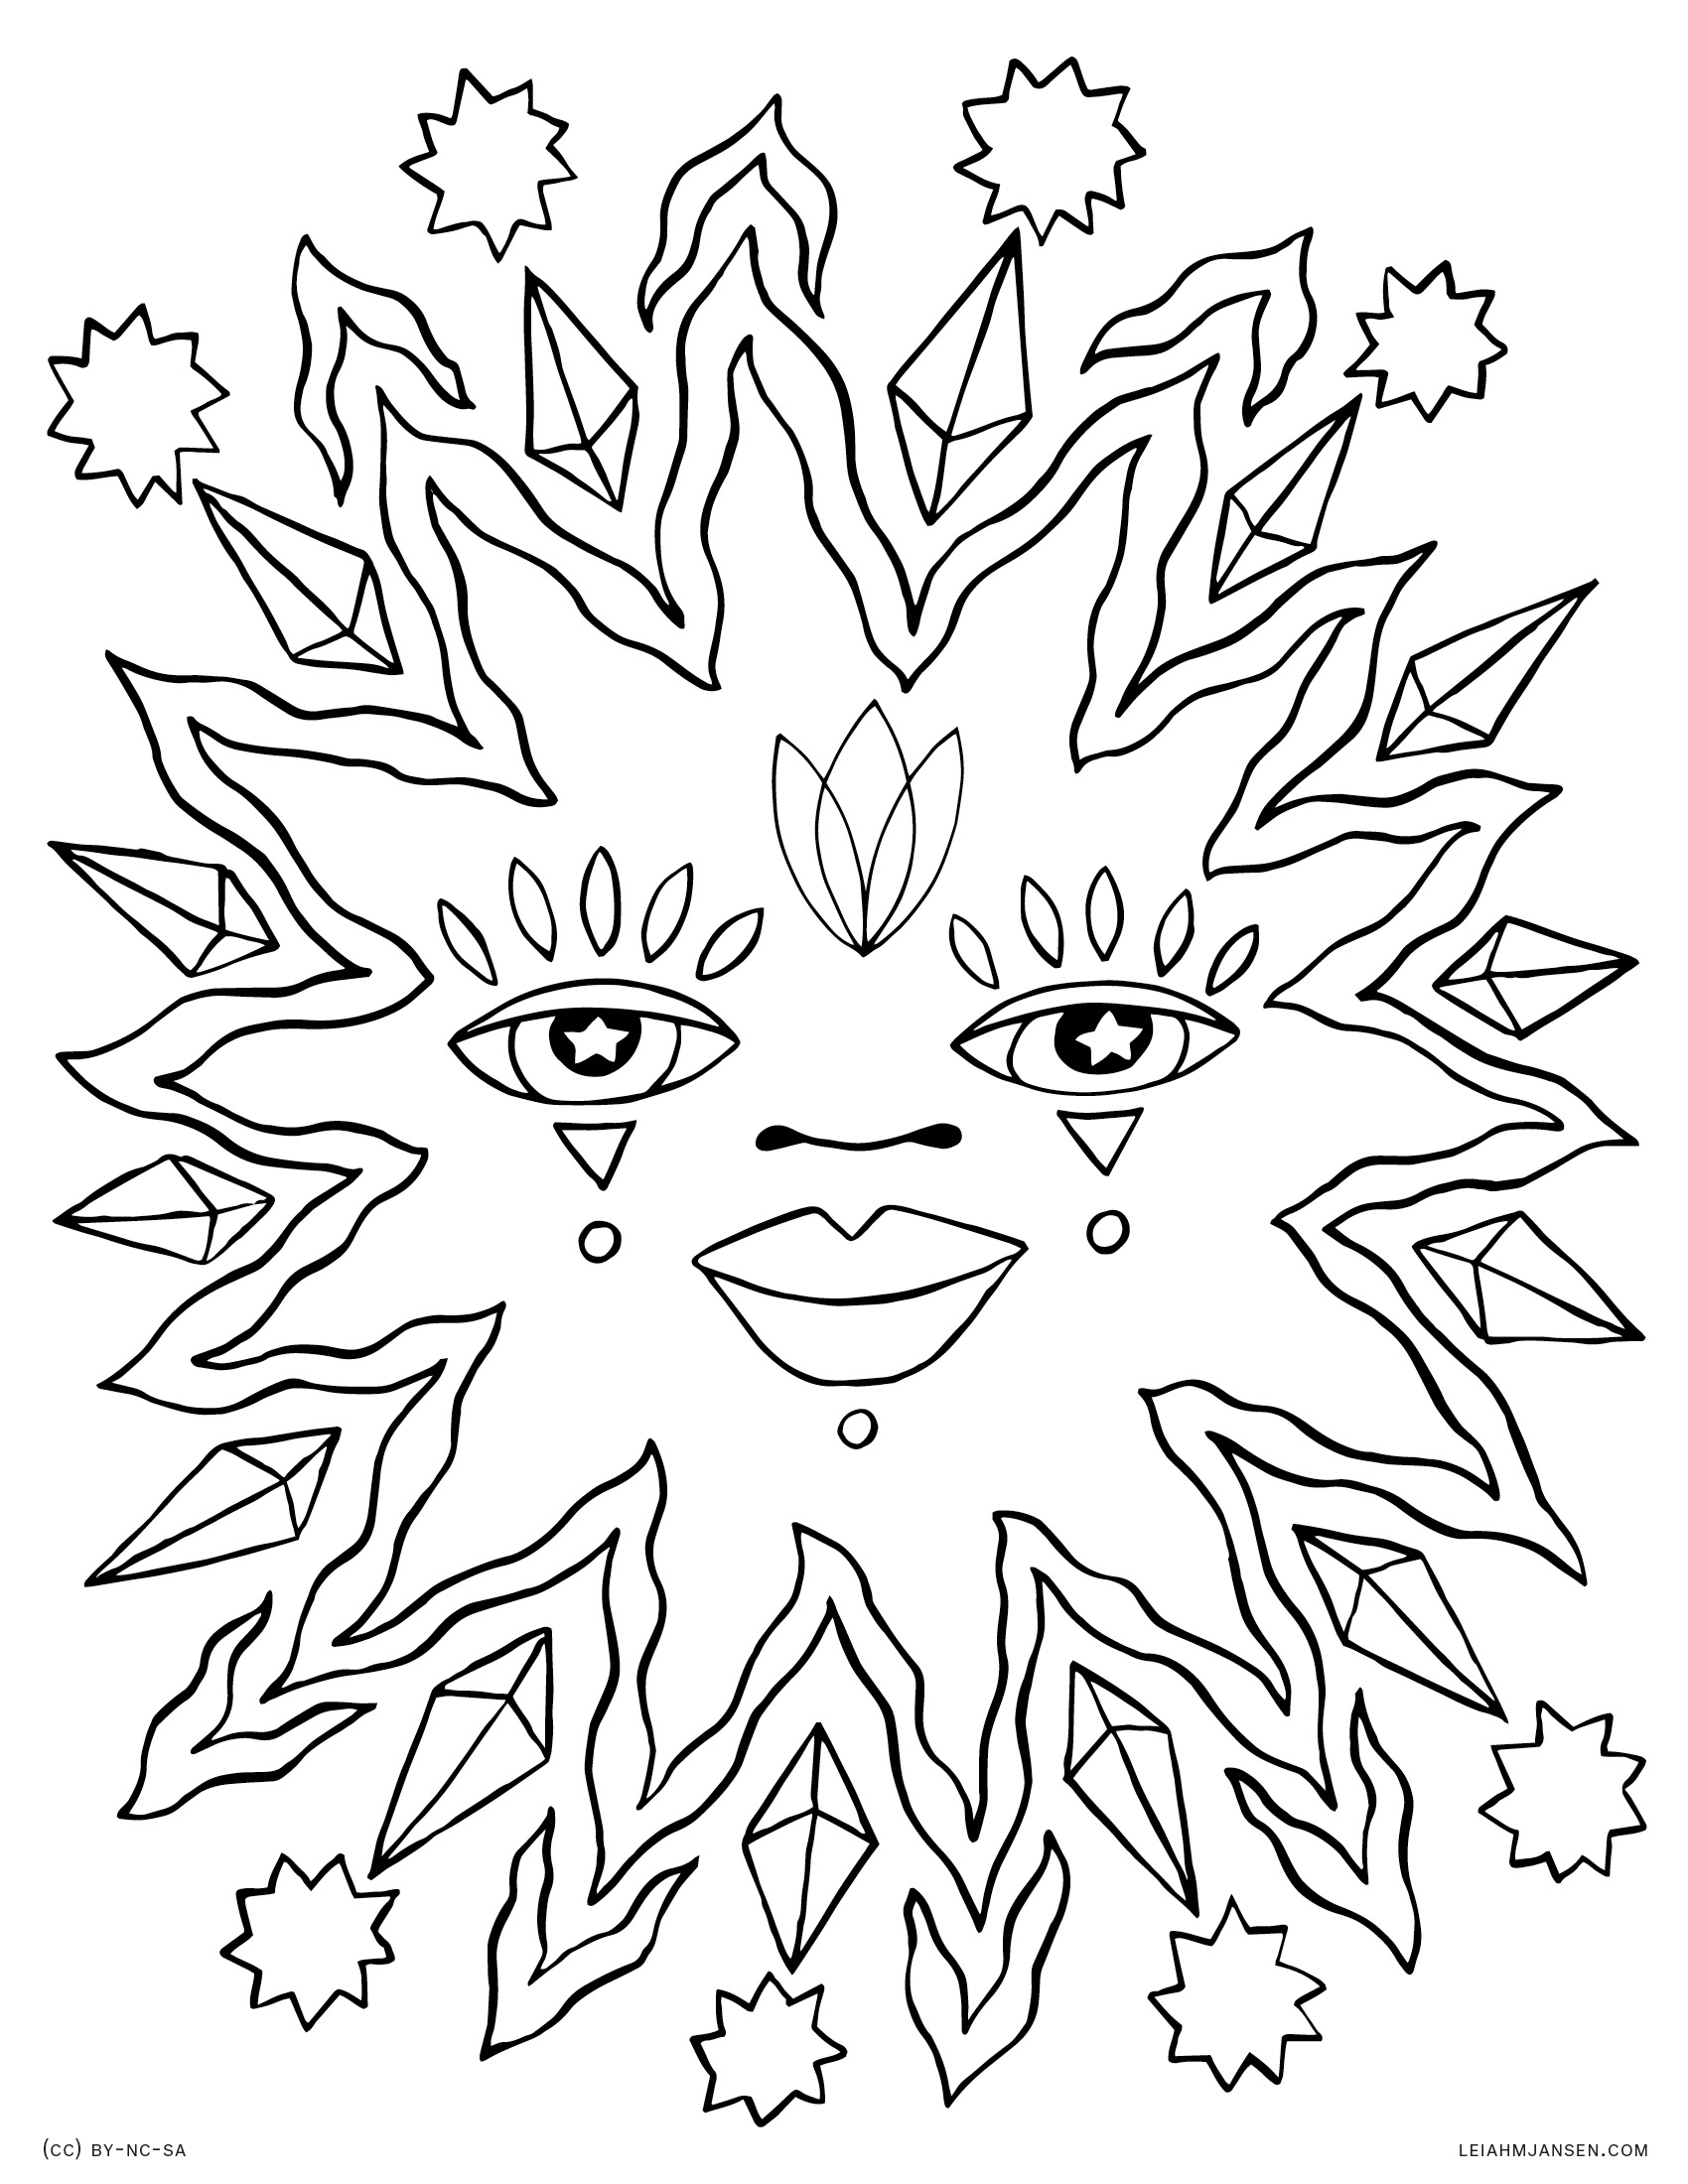 Celestial Sun Smiling Sunburst Free Printable Coloring Page for Adults and Kids